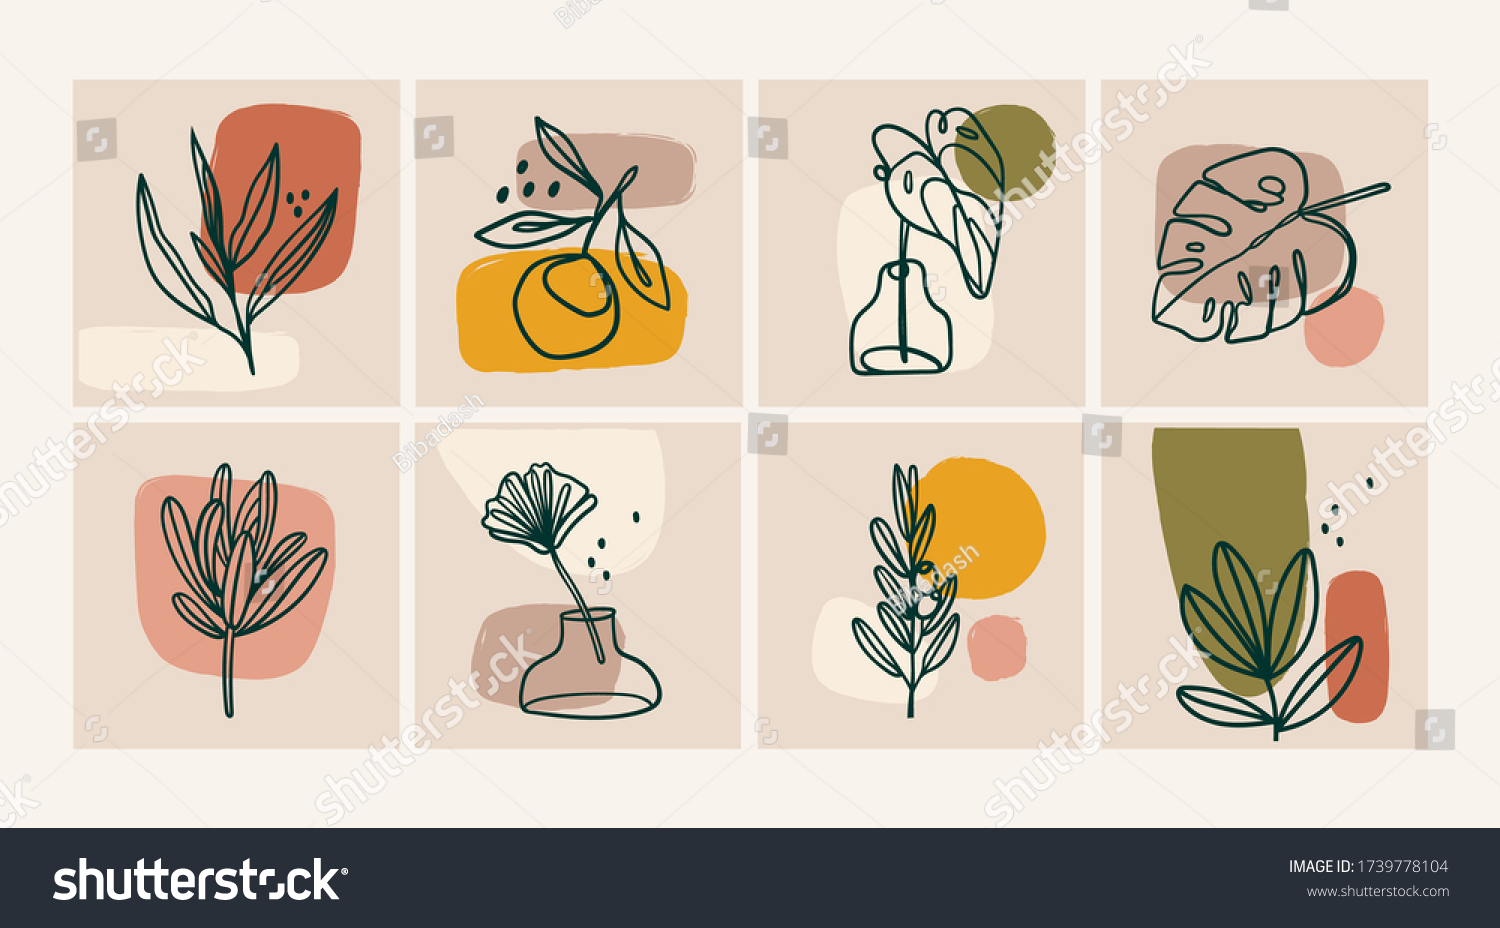 SVG of Various Leaves and Flowers, abstract shapes. Ink painting style. Contemporary Hand drawn Vector illustrations. Continuous line, minimalistic elegant concept. All elements are isolated svg